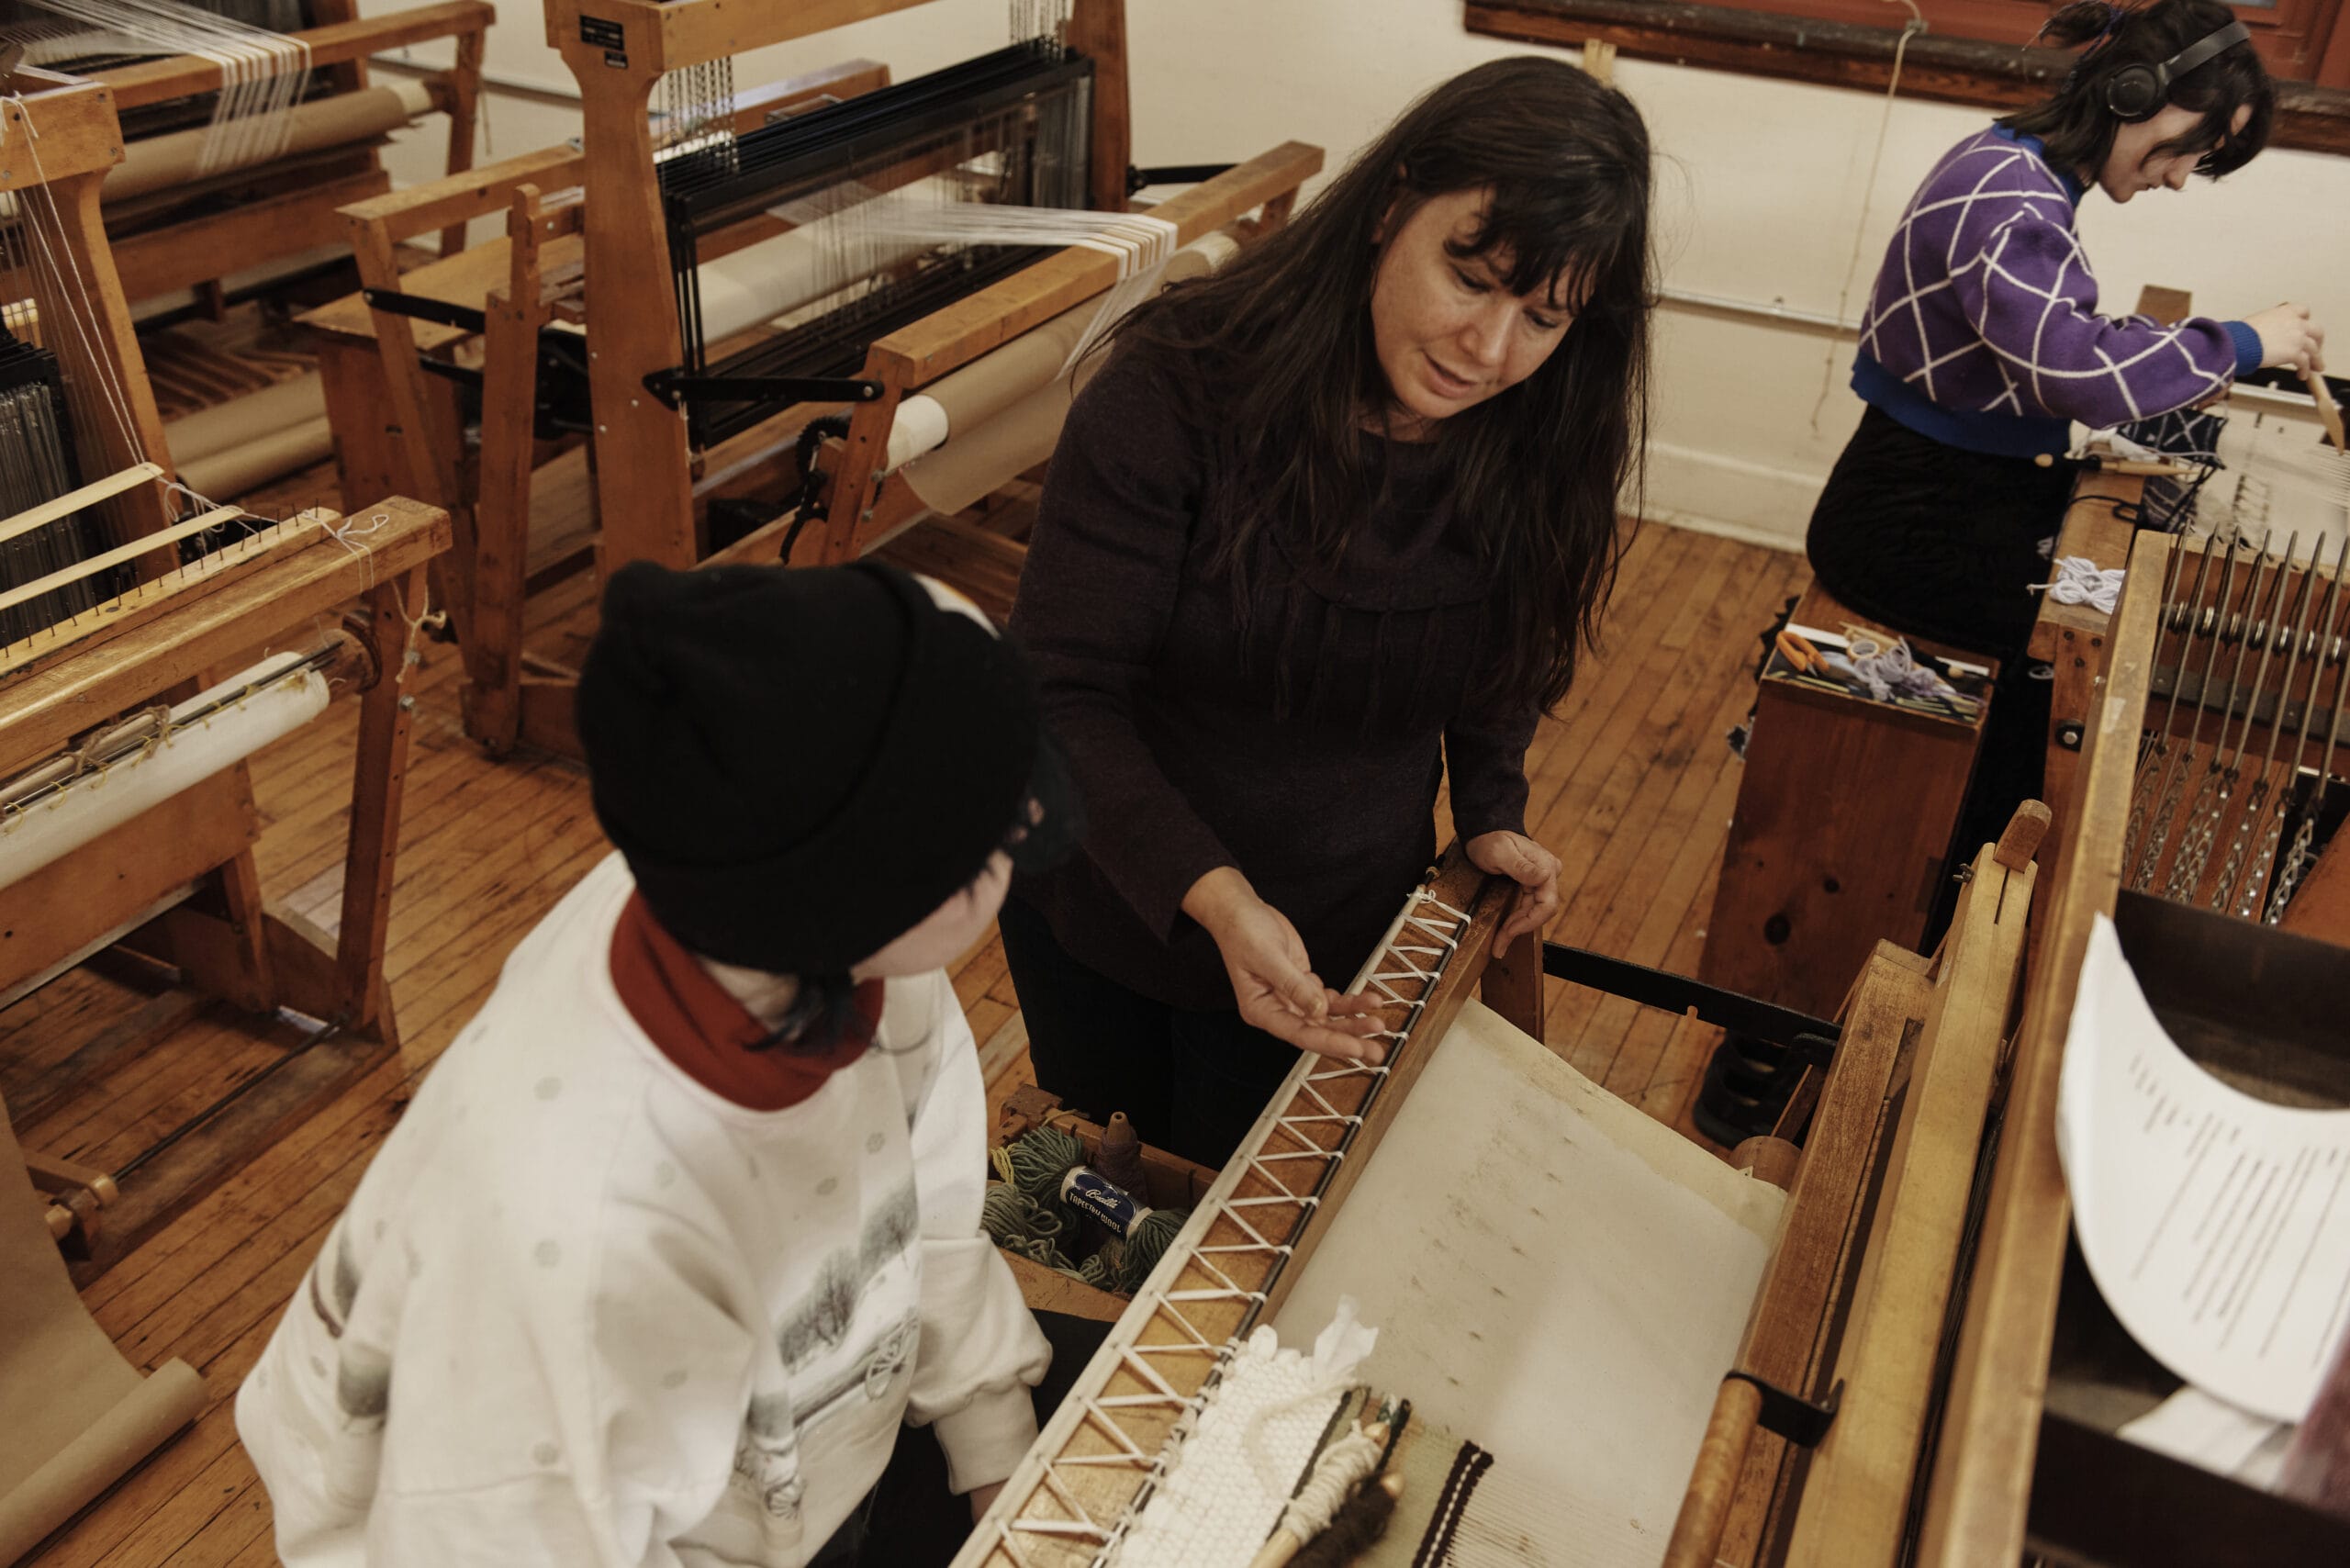 Faculty member Jenine Shereos stands over a student weaving